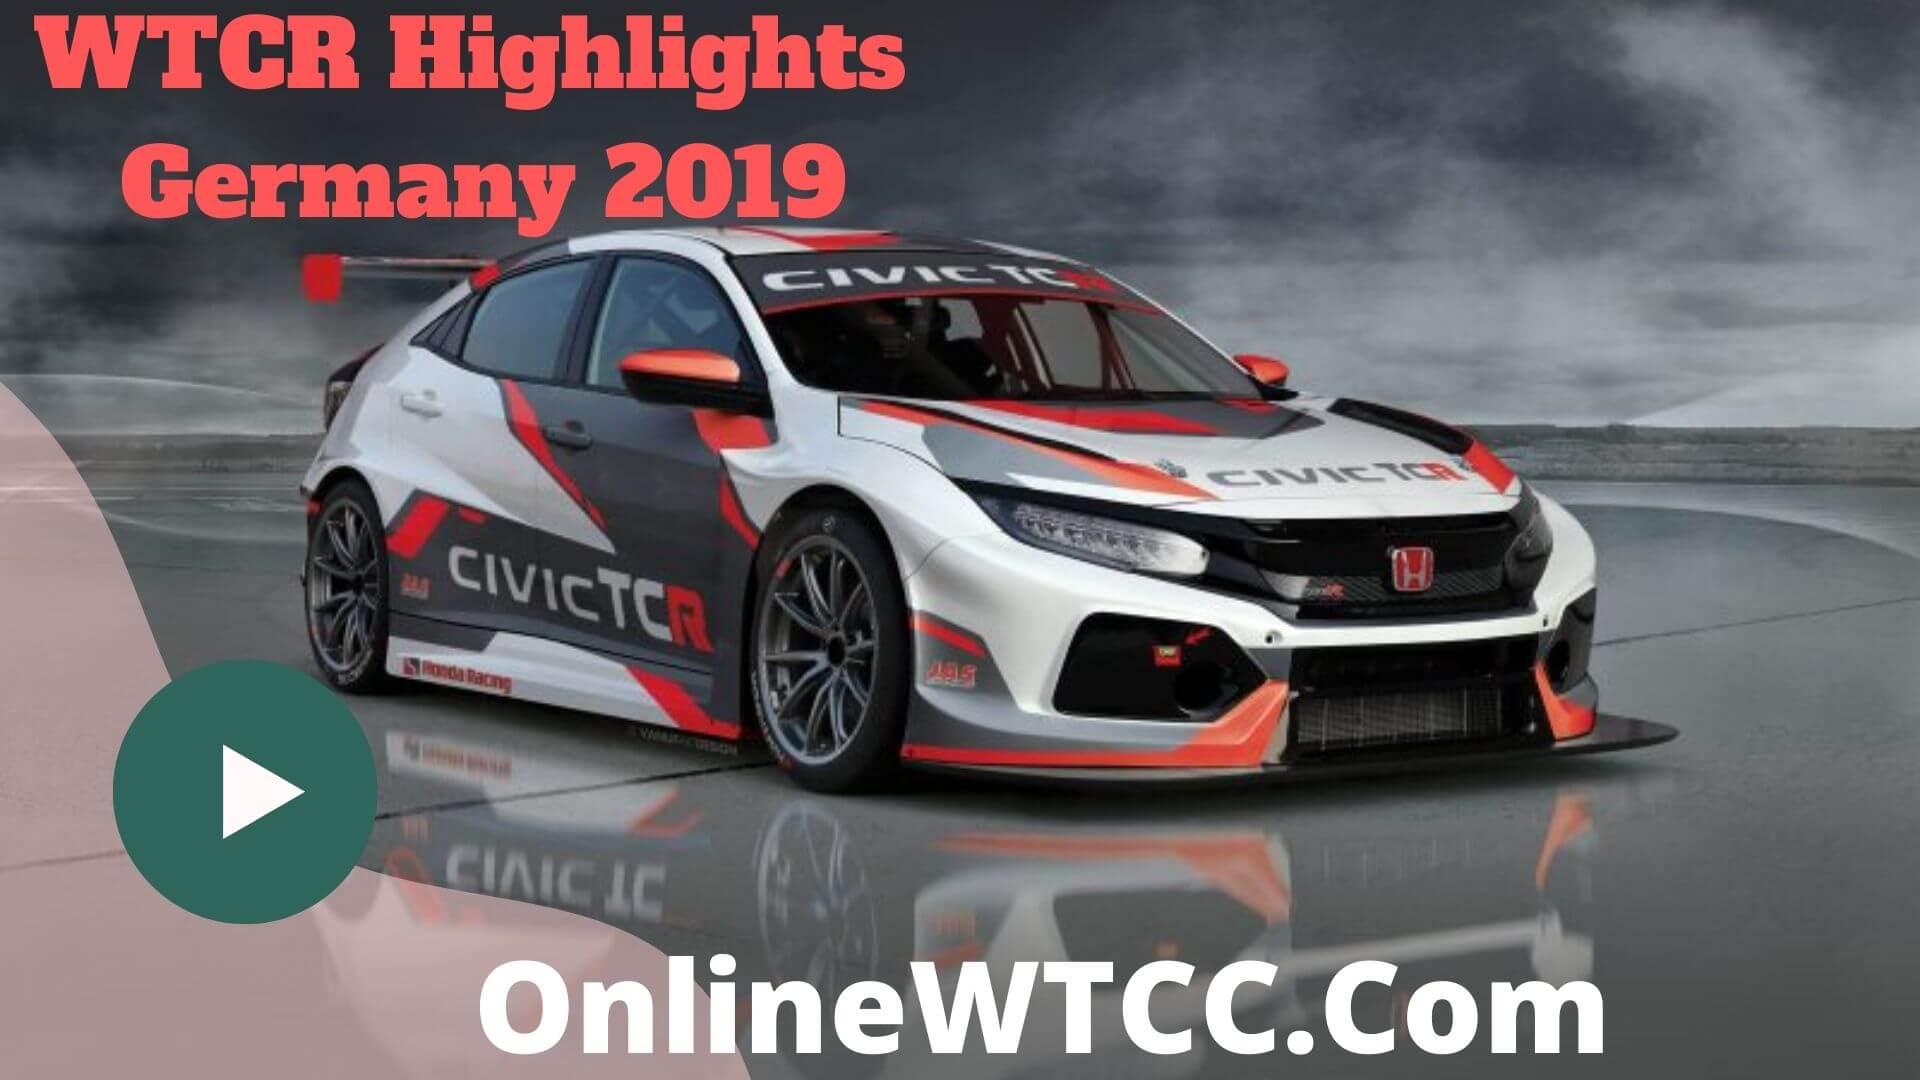 Germany WTCR Highlights 2019